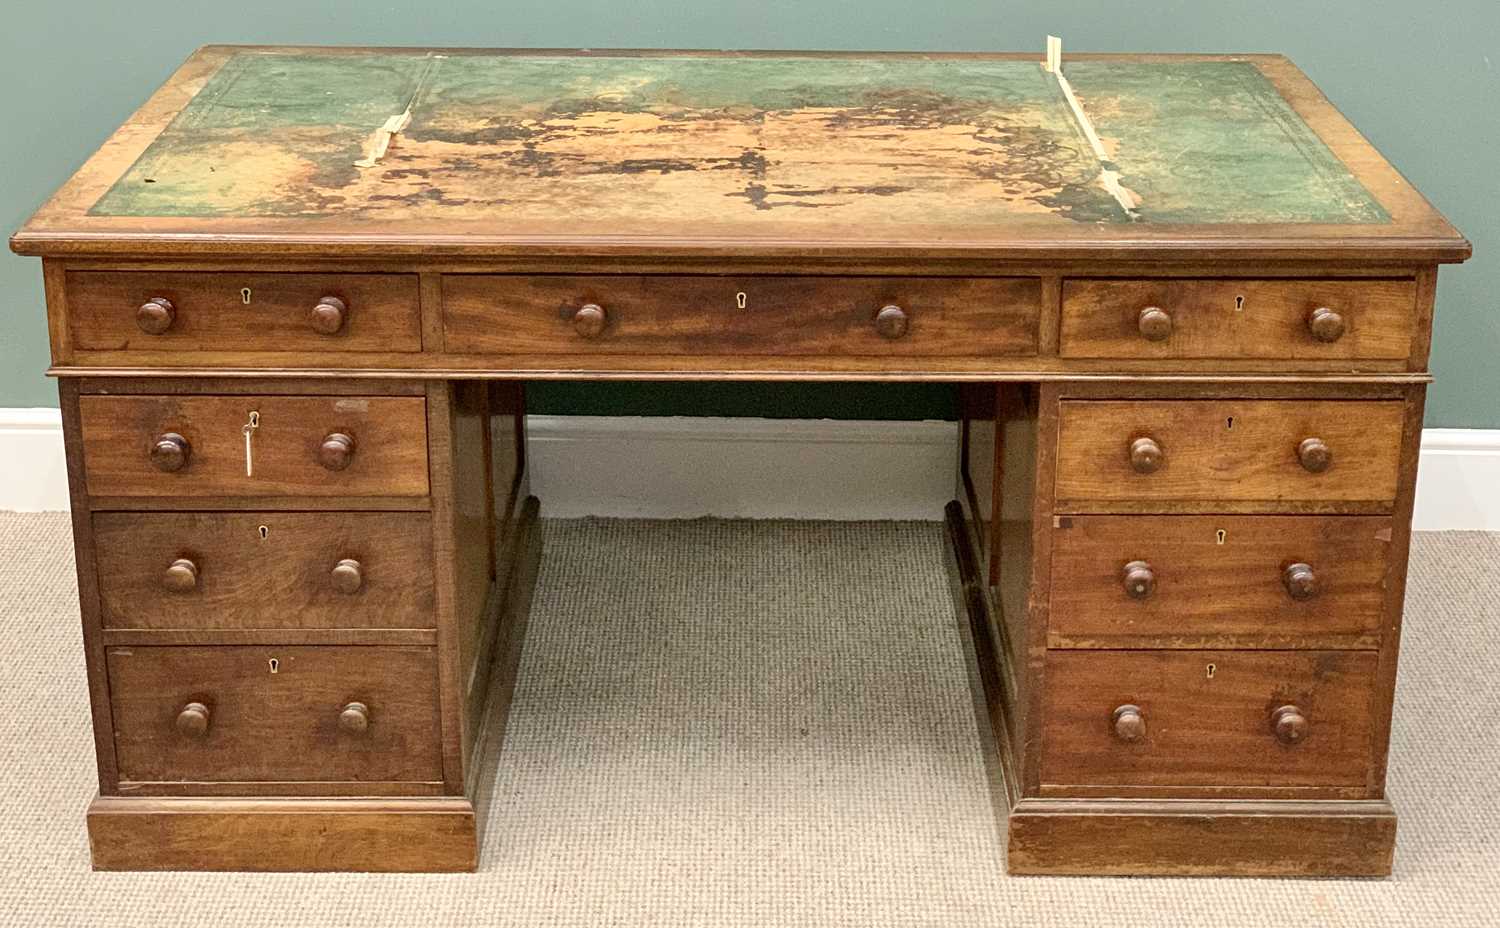 VICTORIAN MAHOGANY TWIN PEDESTAL DESK - a large example having multiple drawers and turned wooden